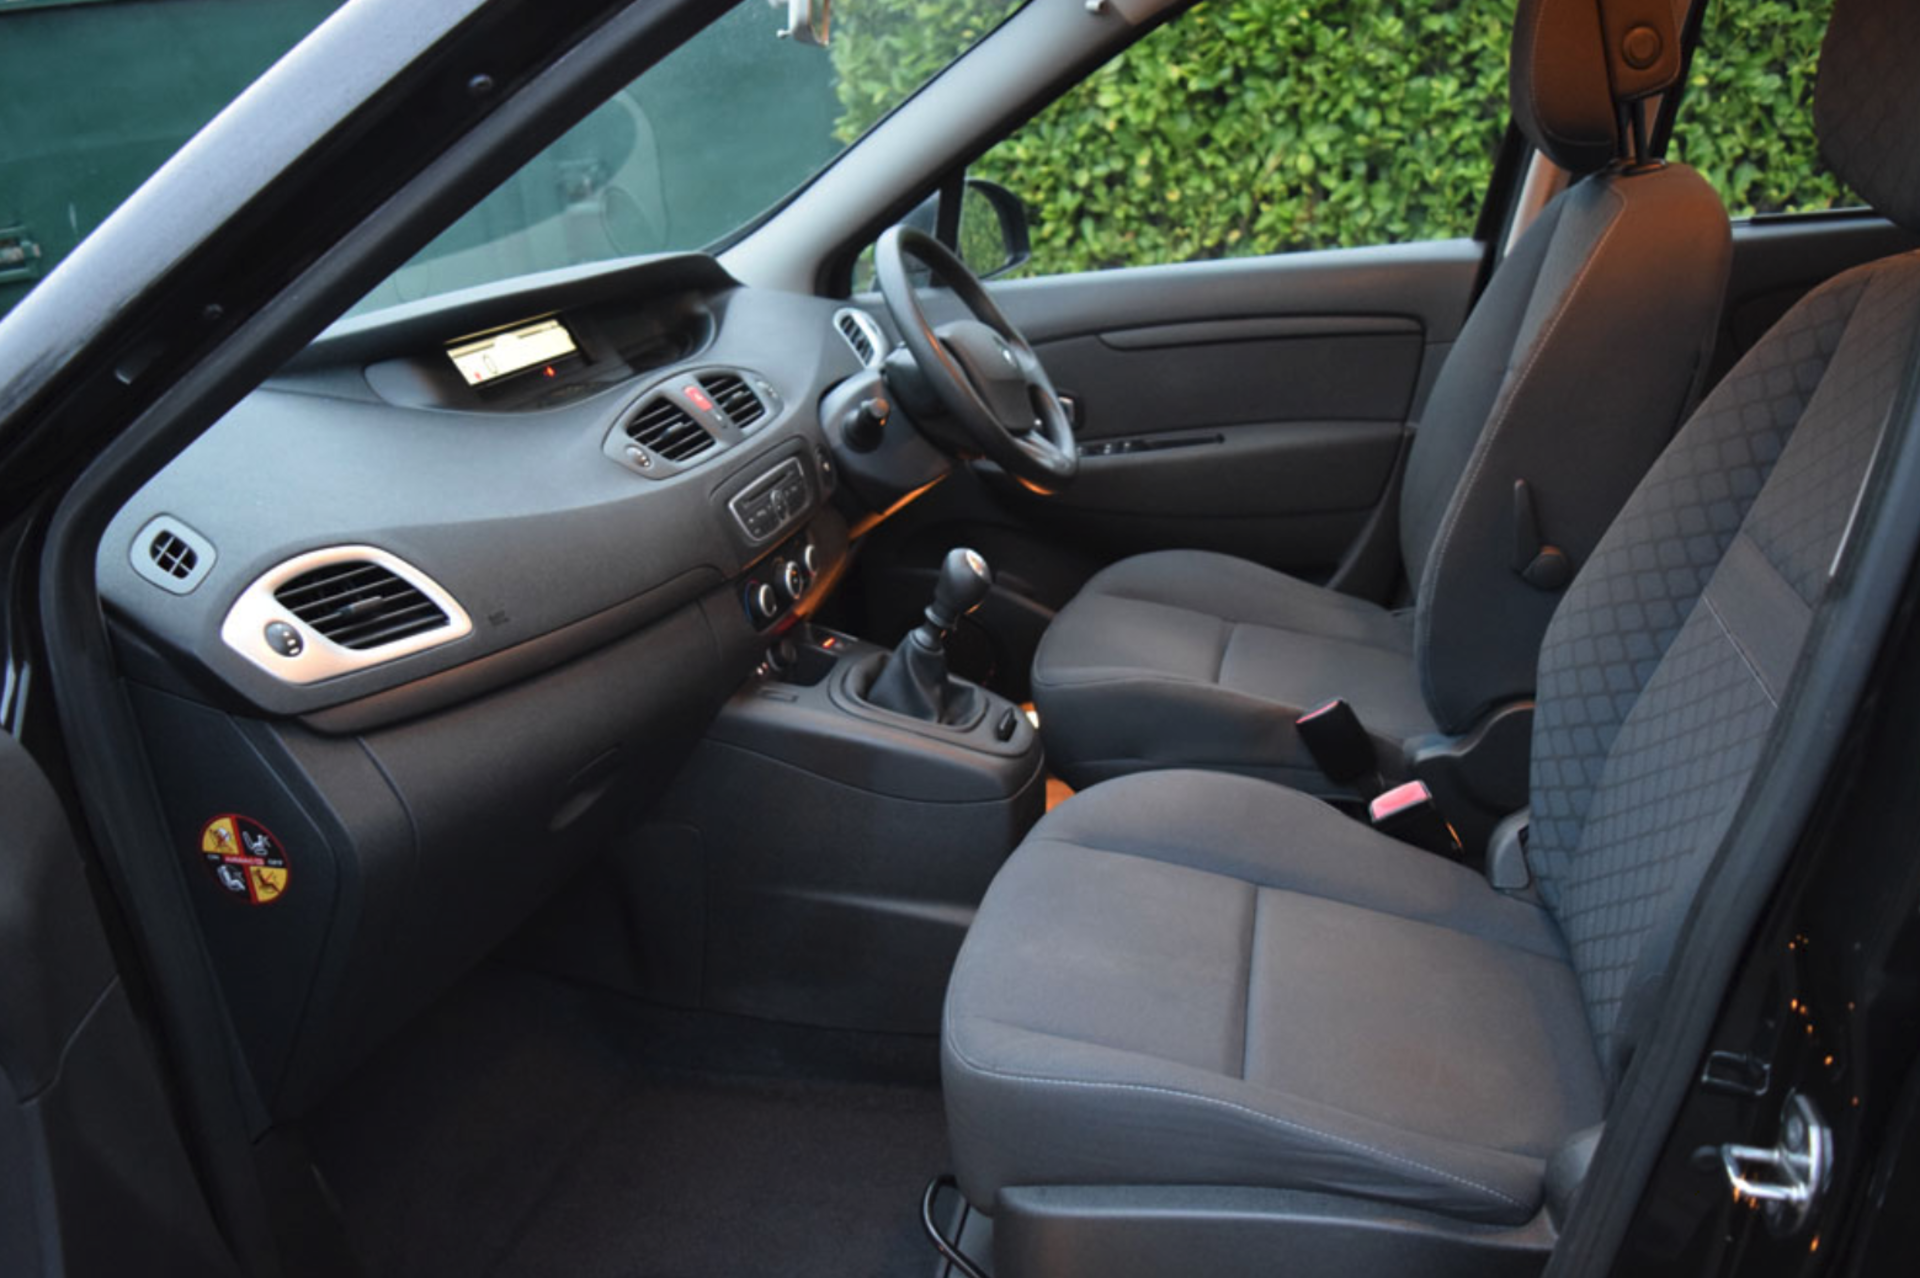 2010 Renault Scenic 1.5 Expression dCi 105 5dr - Image 6 of 11